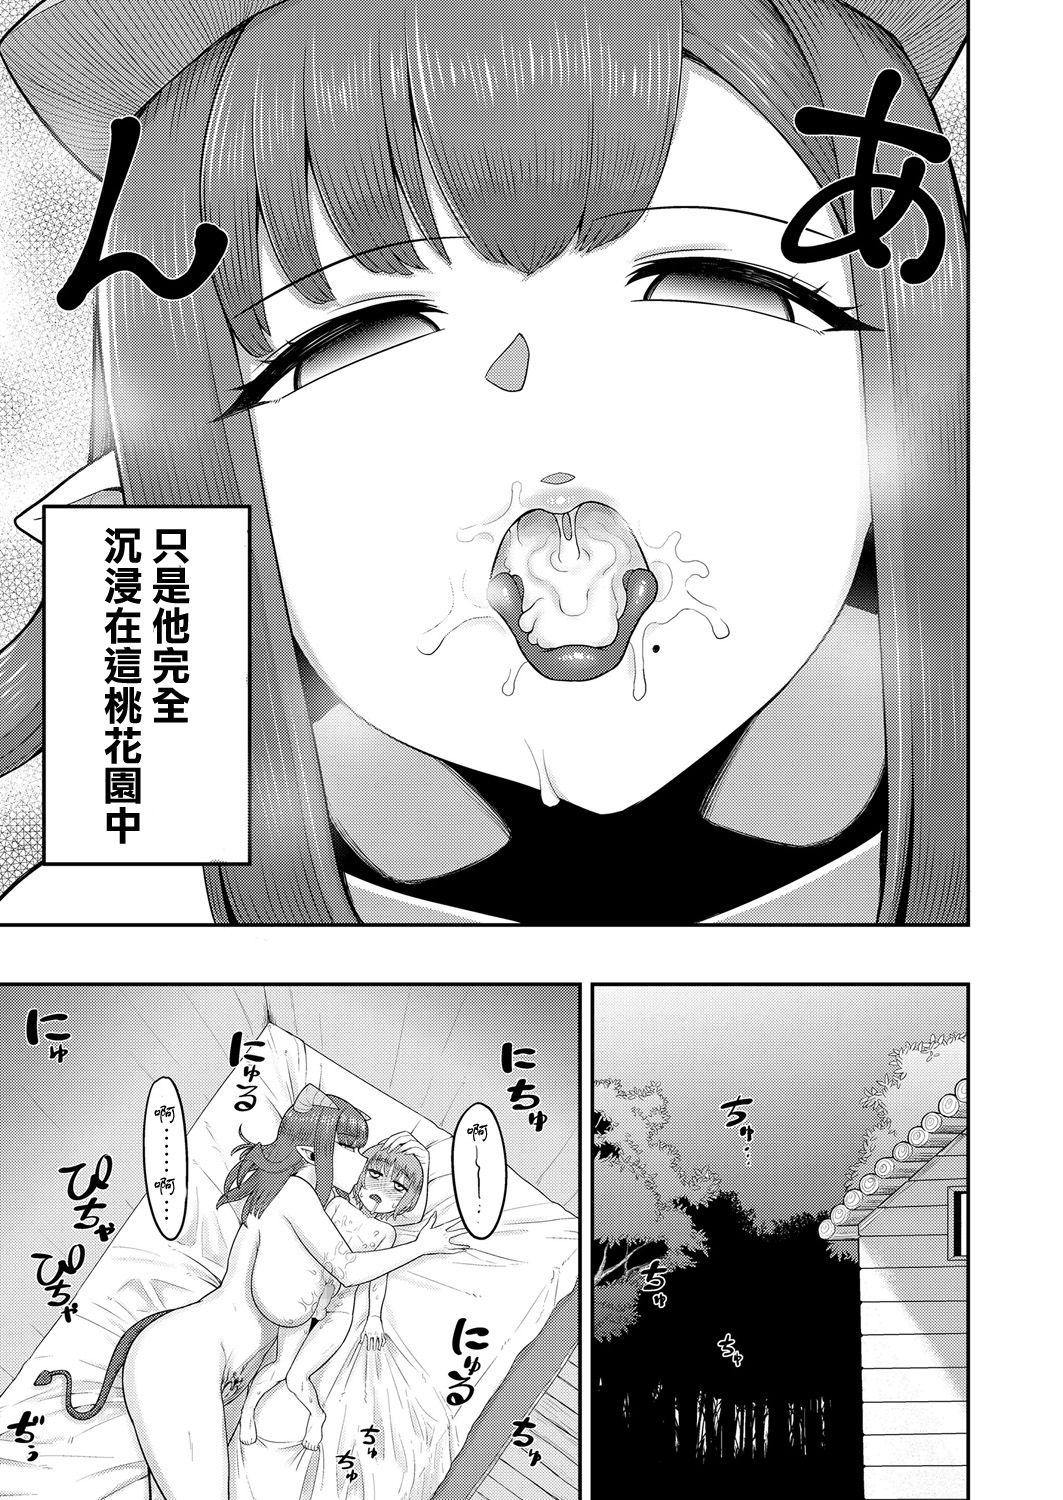 Baile Imprinting Imp | 印記淫魔 Gay Toys - Page 10